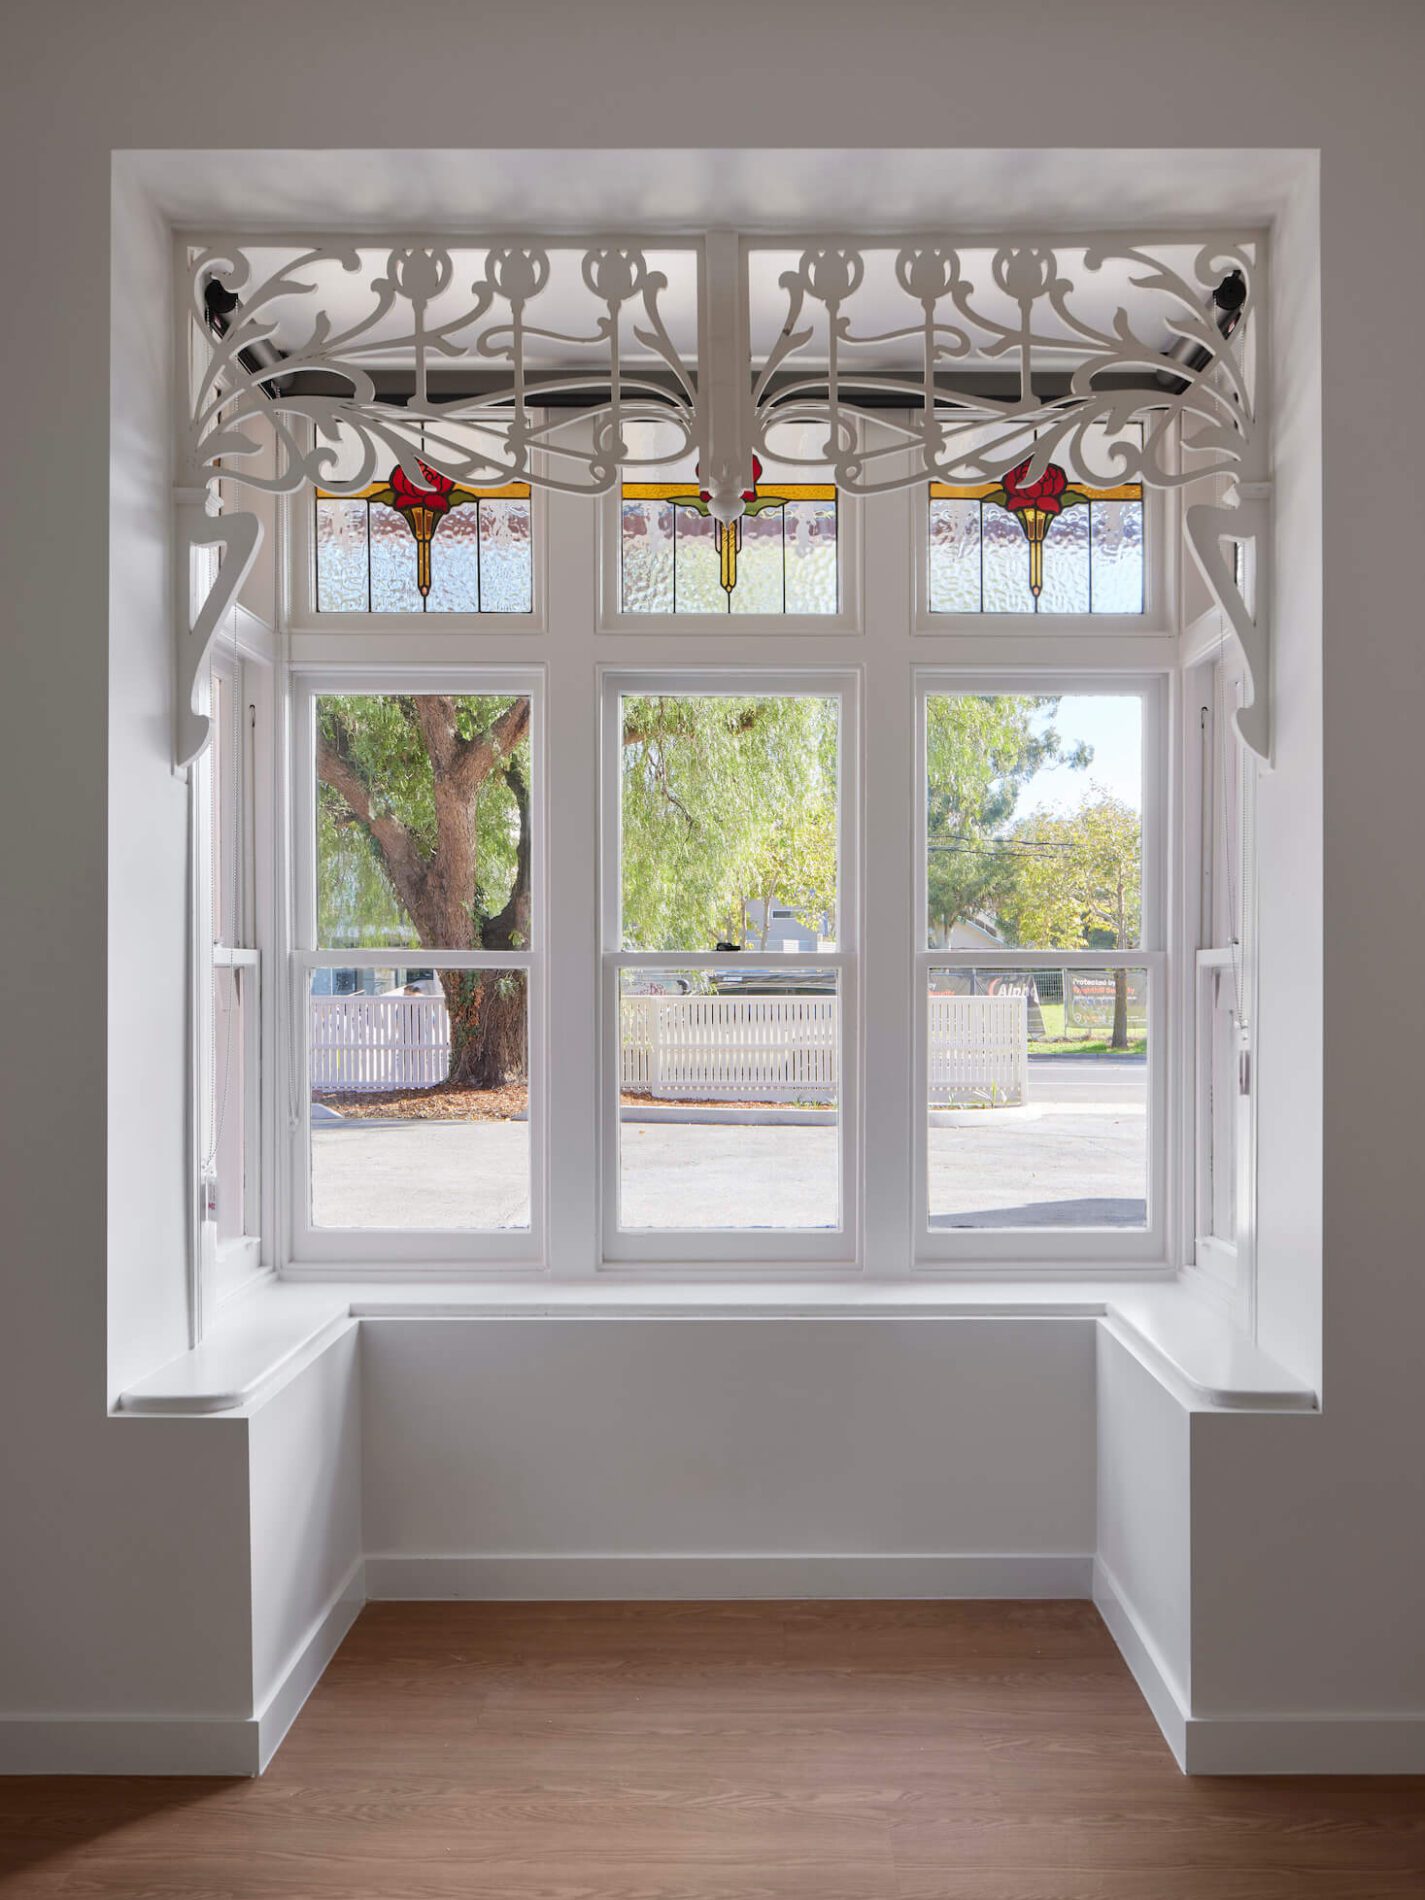 Box bay window with stained glass and internal fretwork